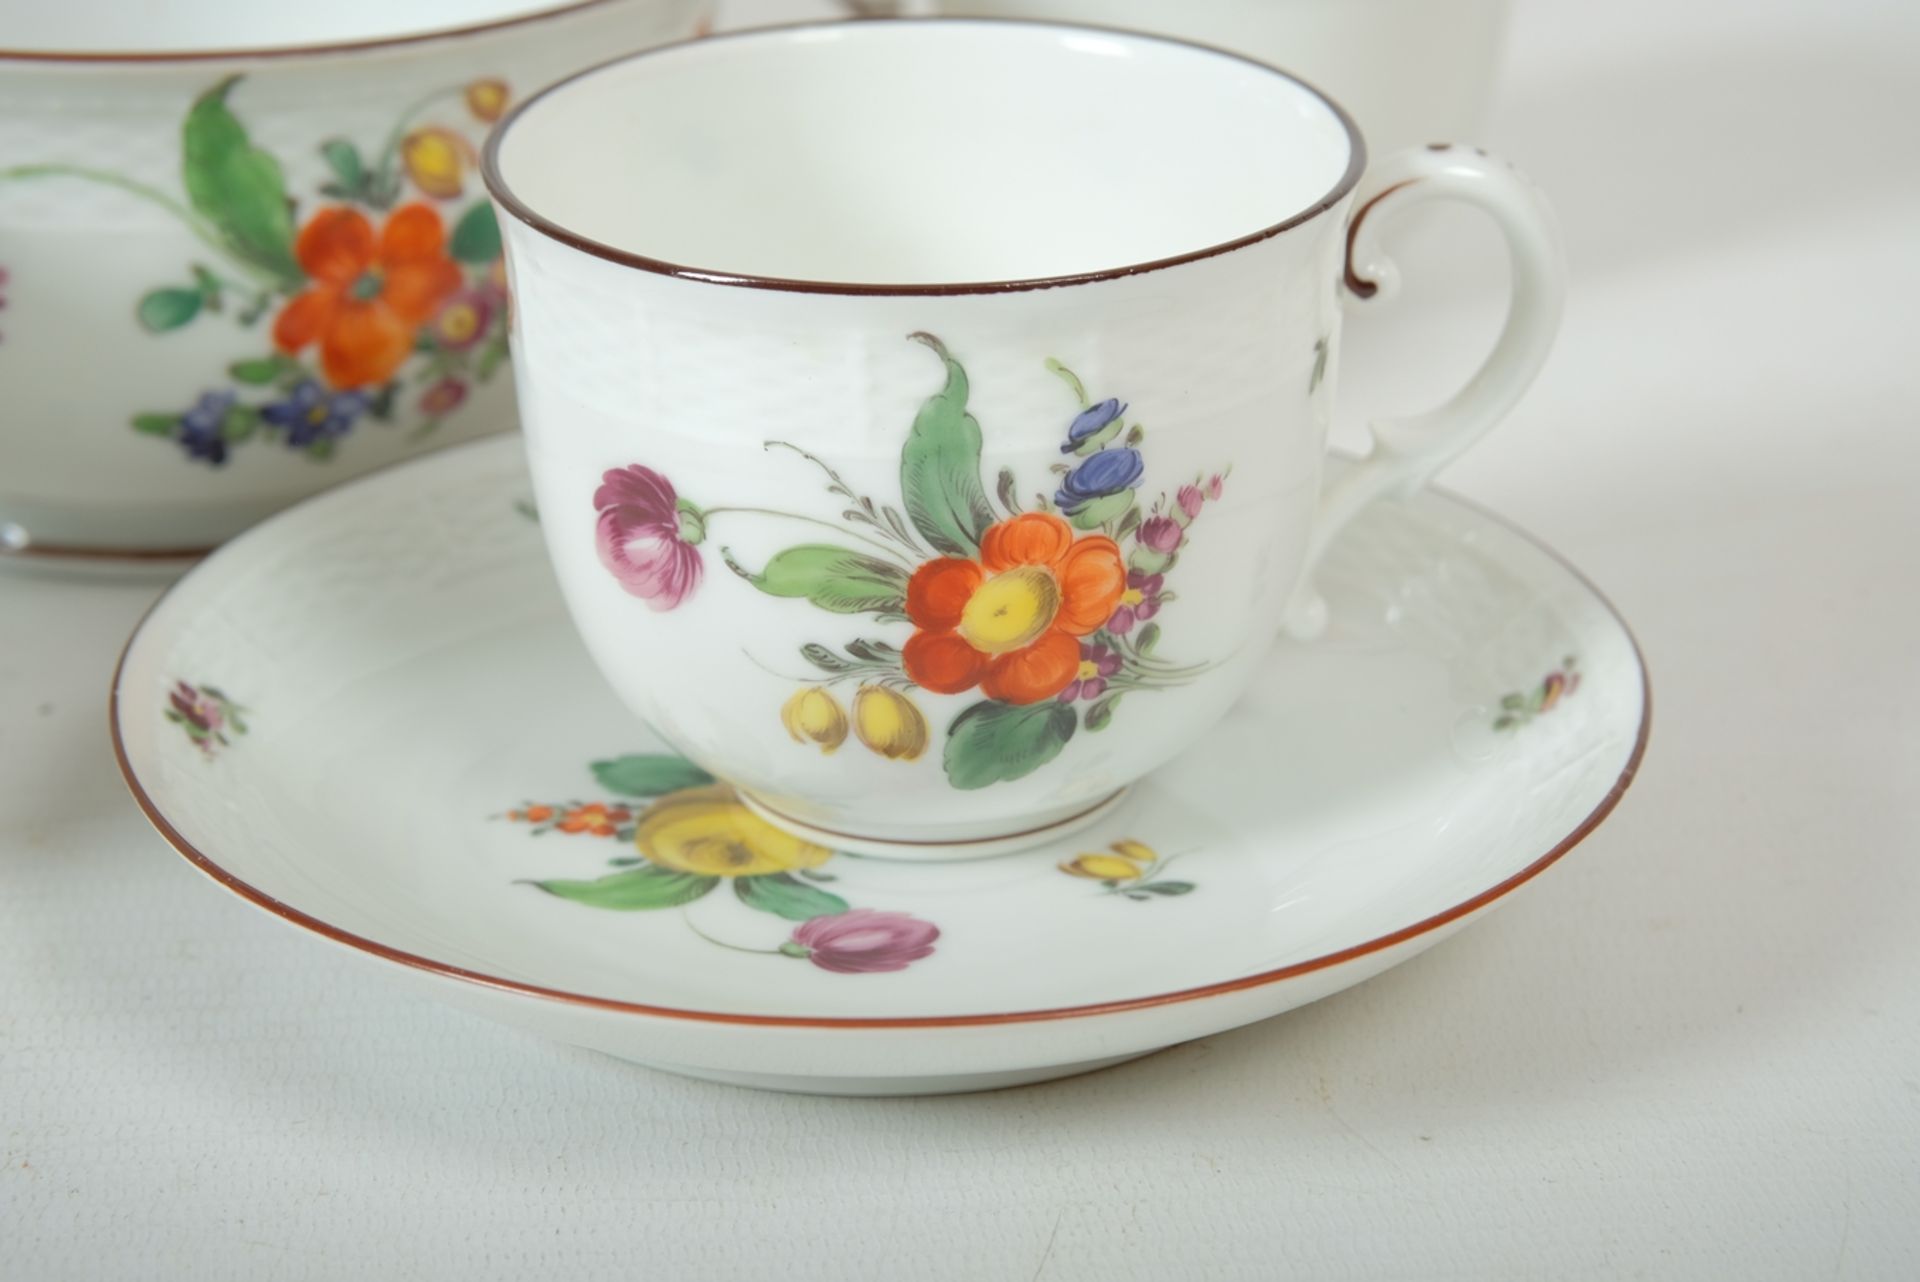 Nymphenburg coffee service "Rosenbouquet - brauner Rand", hand-painted, for 5 persons, ozier relief - Image 3 of 5